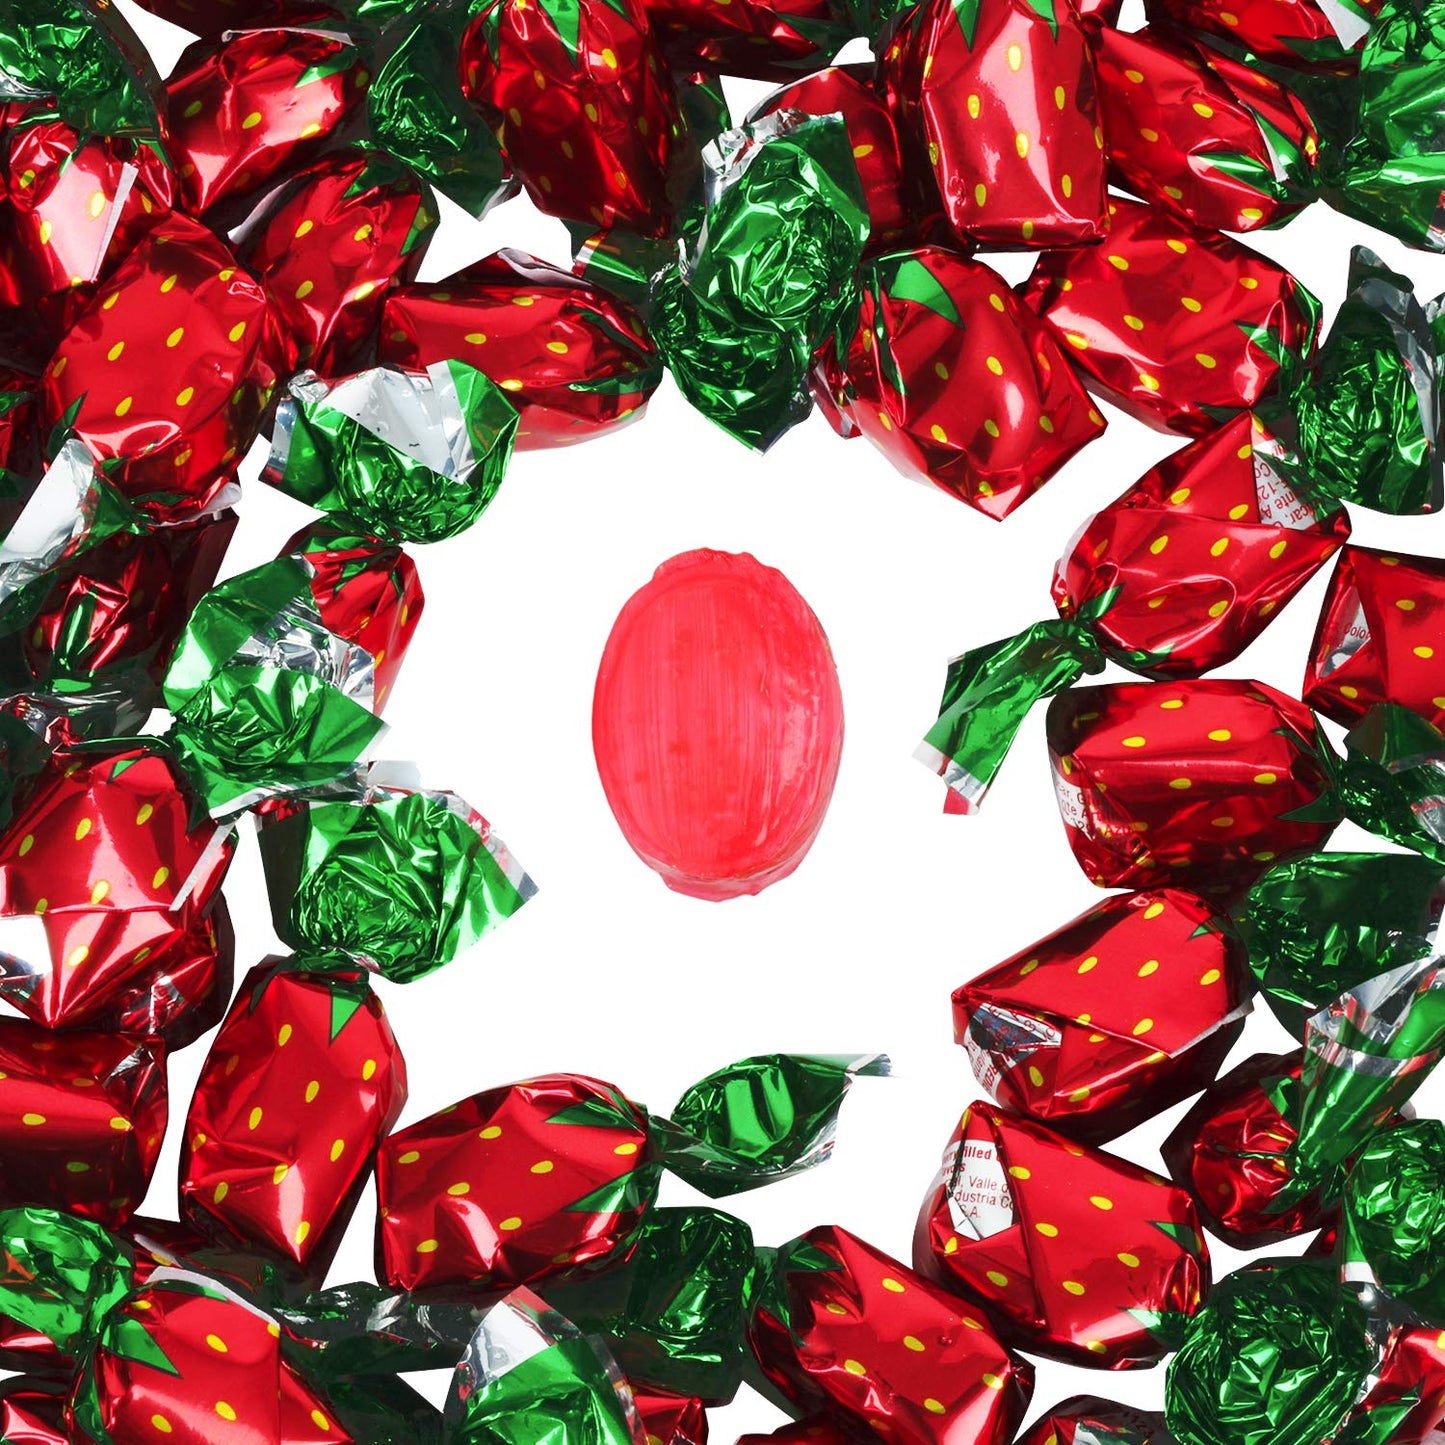 Strawberry Hard Candy - Strawberry Bon Bons - Red Candies - Fruit Flavored - Classic Hard Candy - Bulk Candy - 5 LB